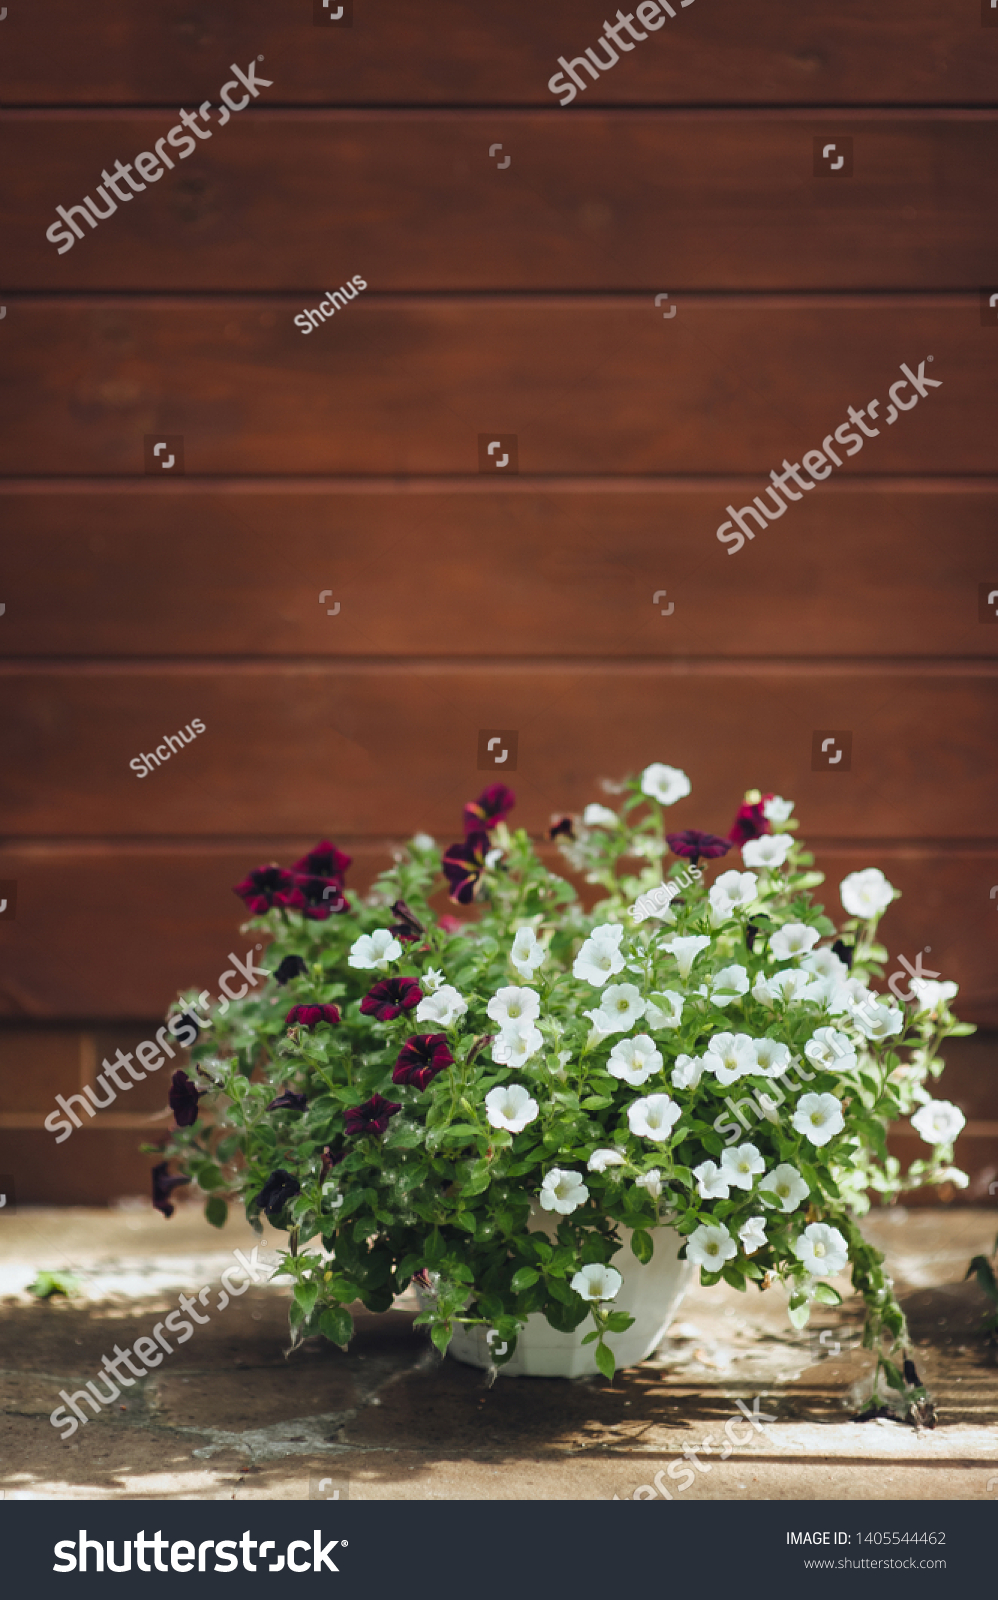 White and red petunia blooms in a pot, on a wooden background. Home flowers in the garden. Blooming and blooming. #1405544462